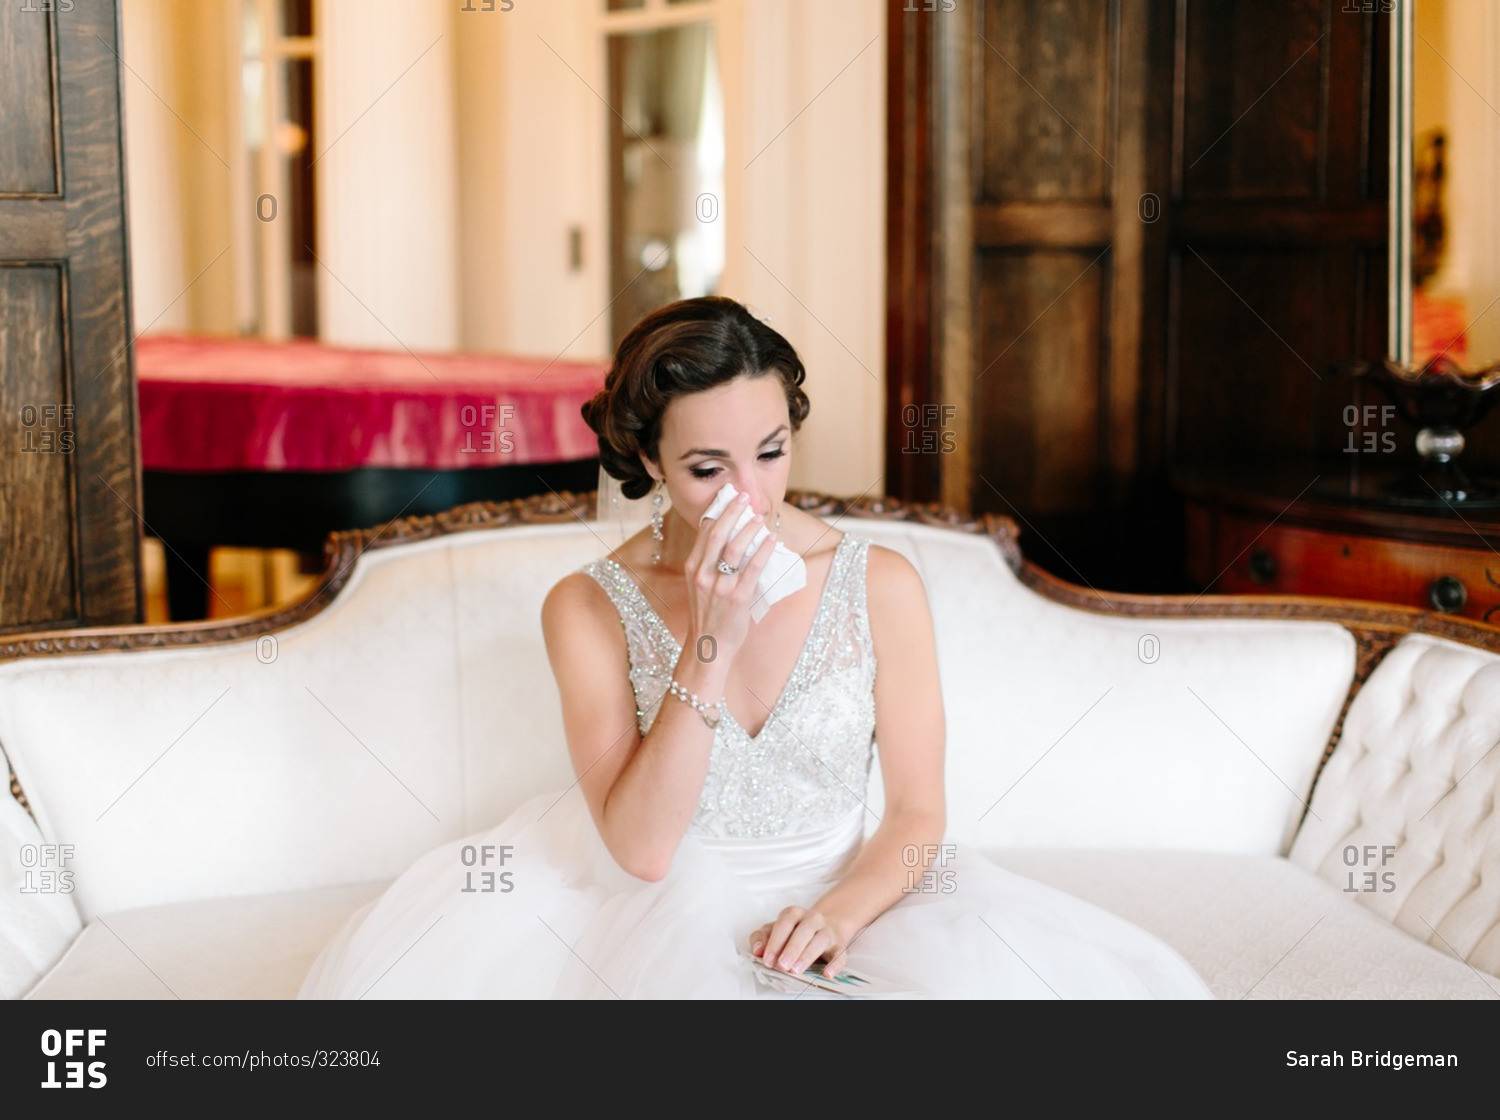 Bride sitting on a white sofa crying